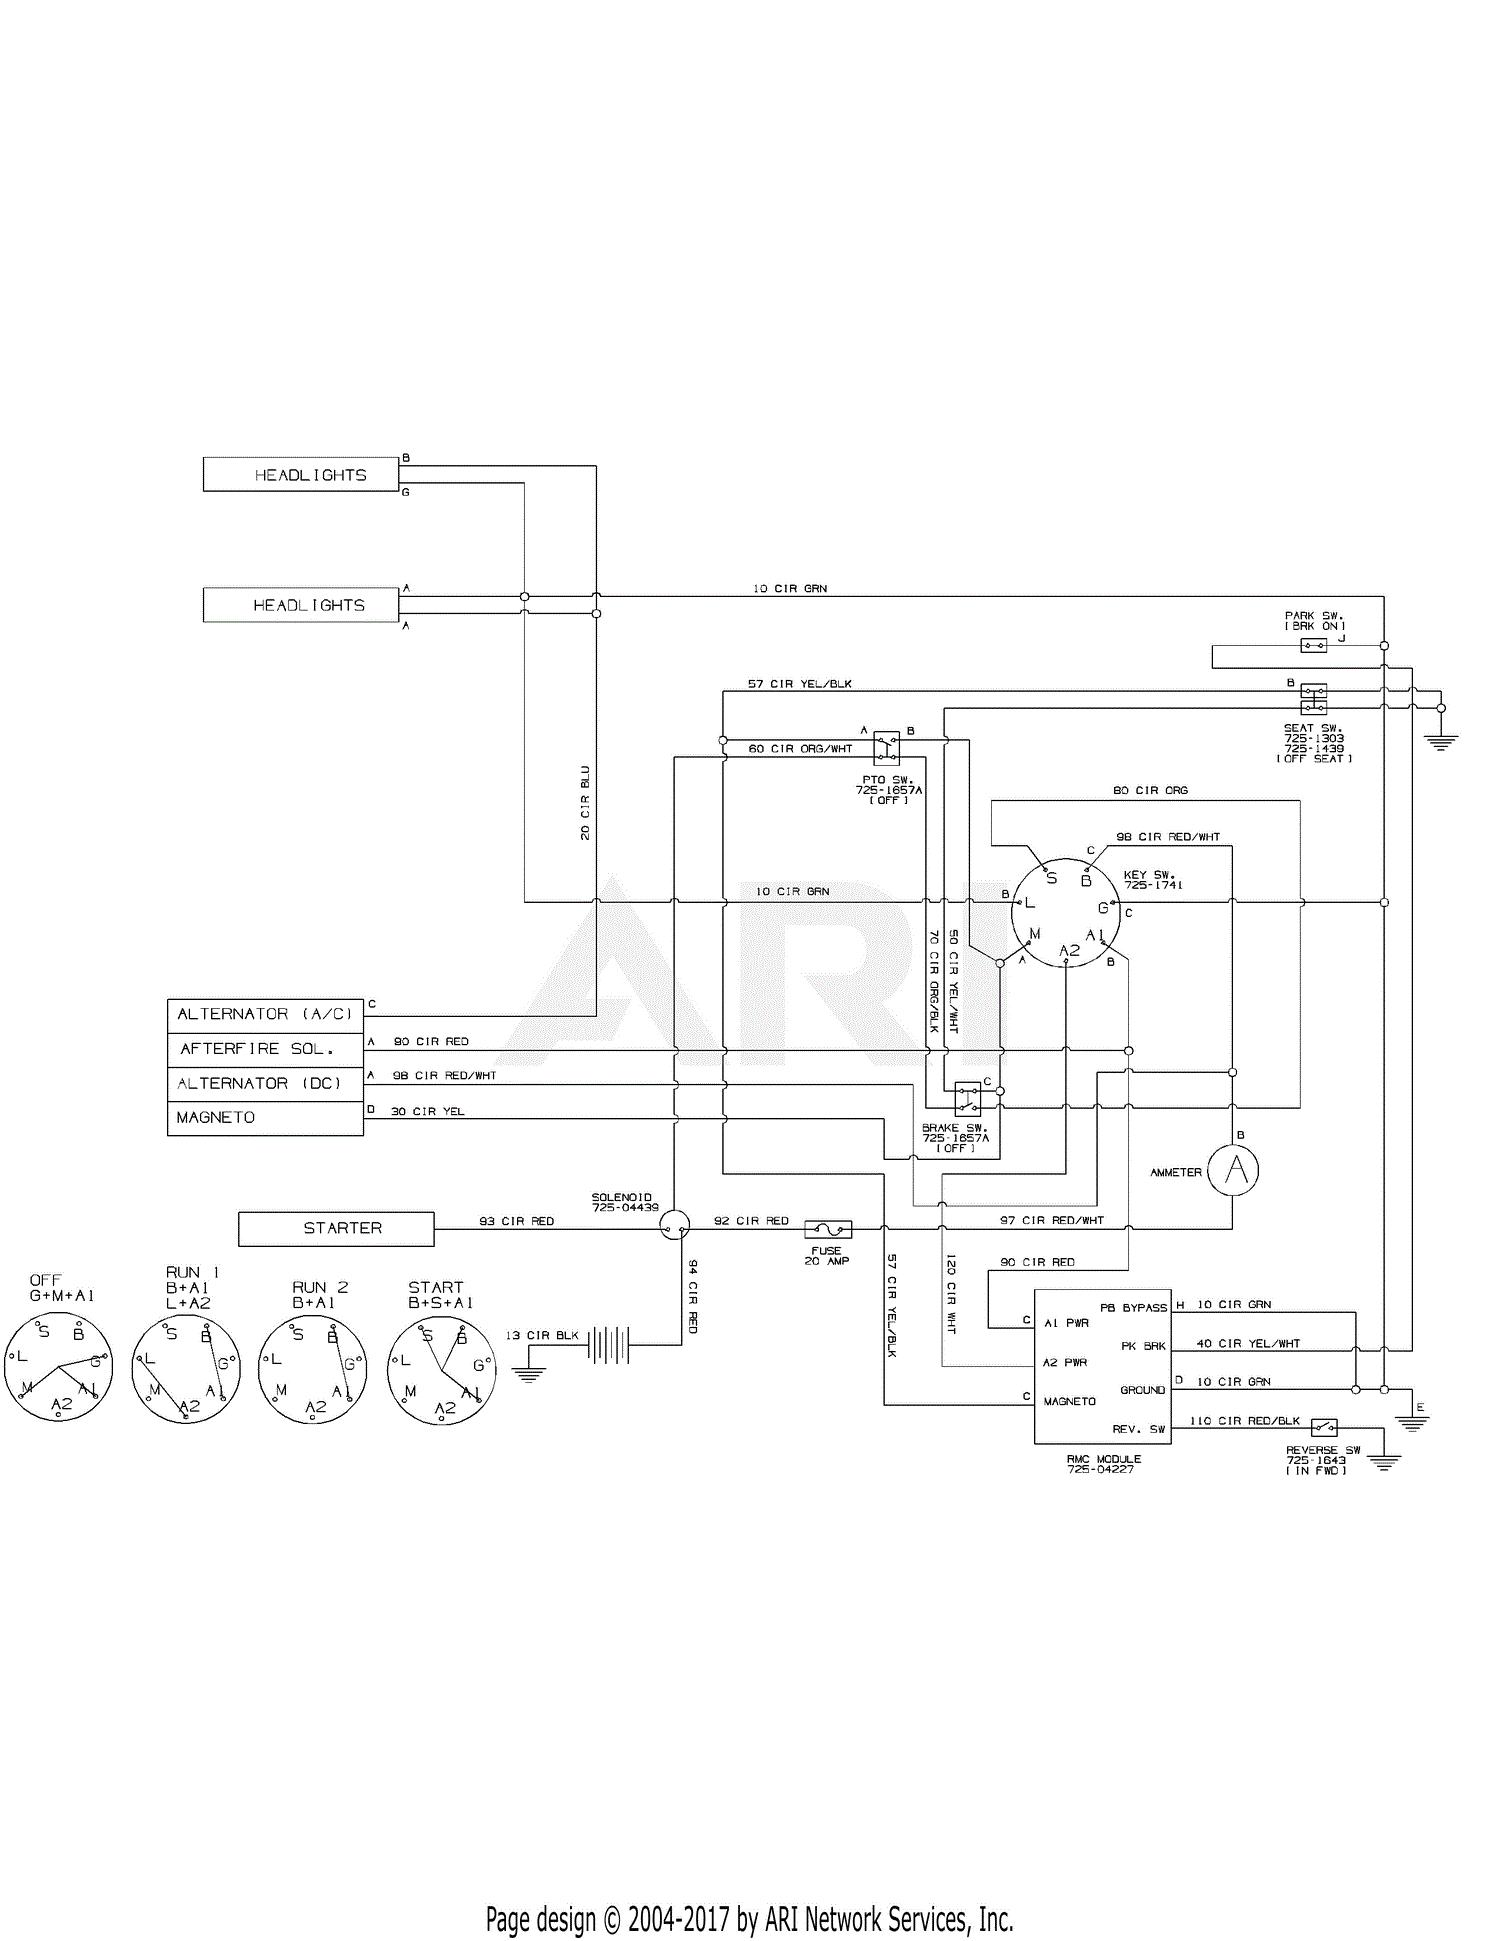 Wiring Diagram For Mtd Lawn Tractor from schematron.org